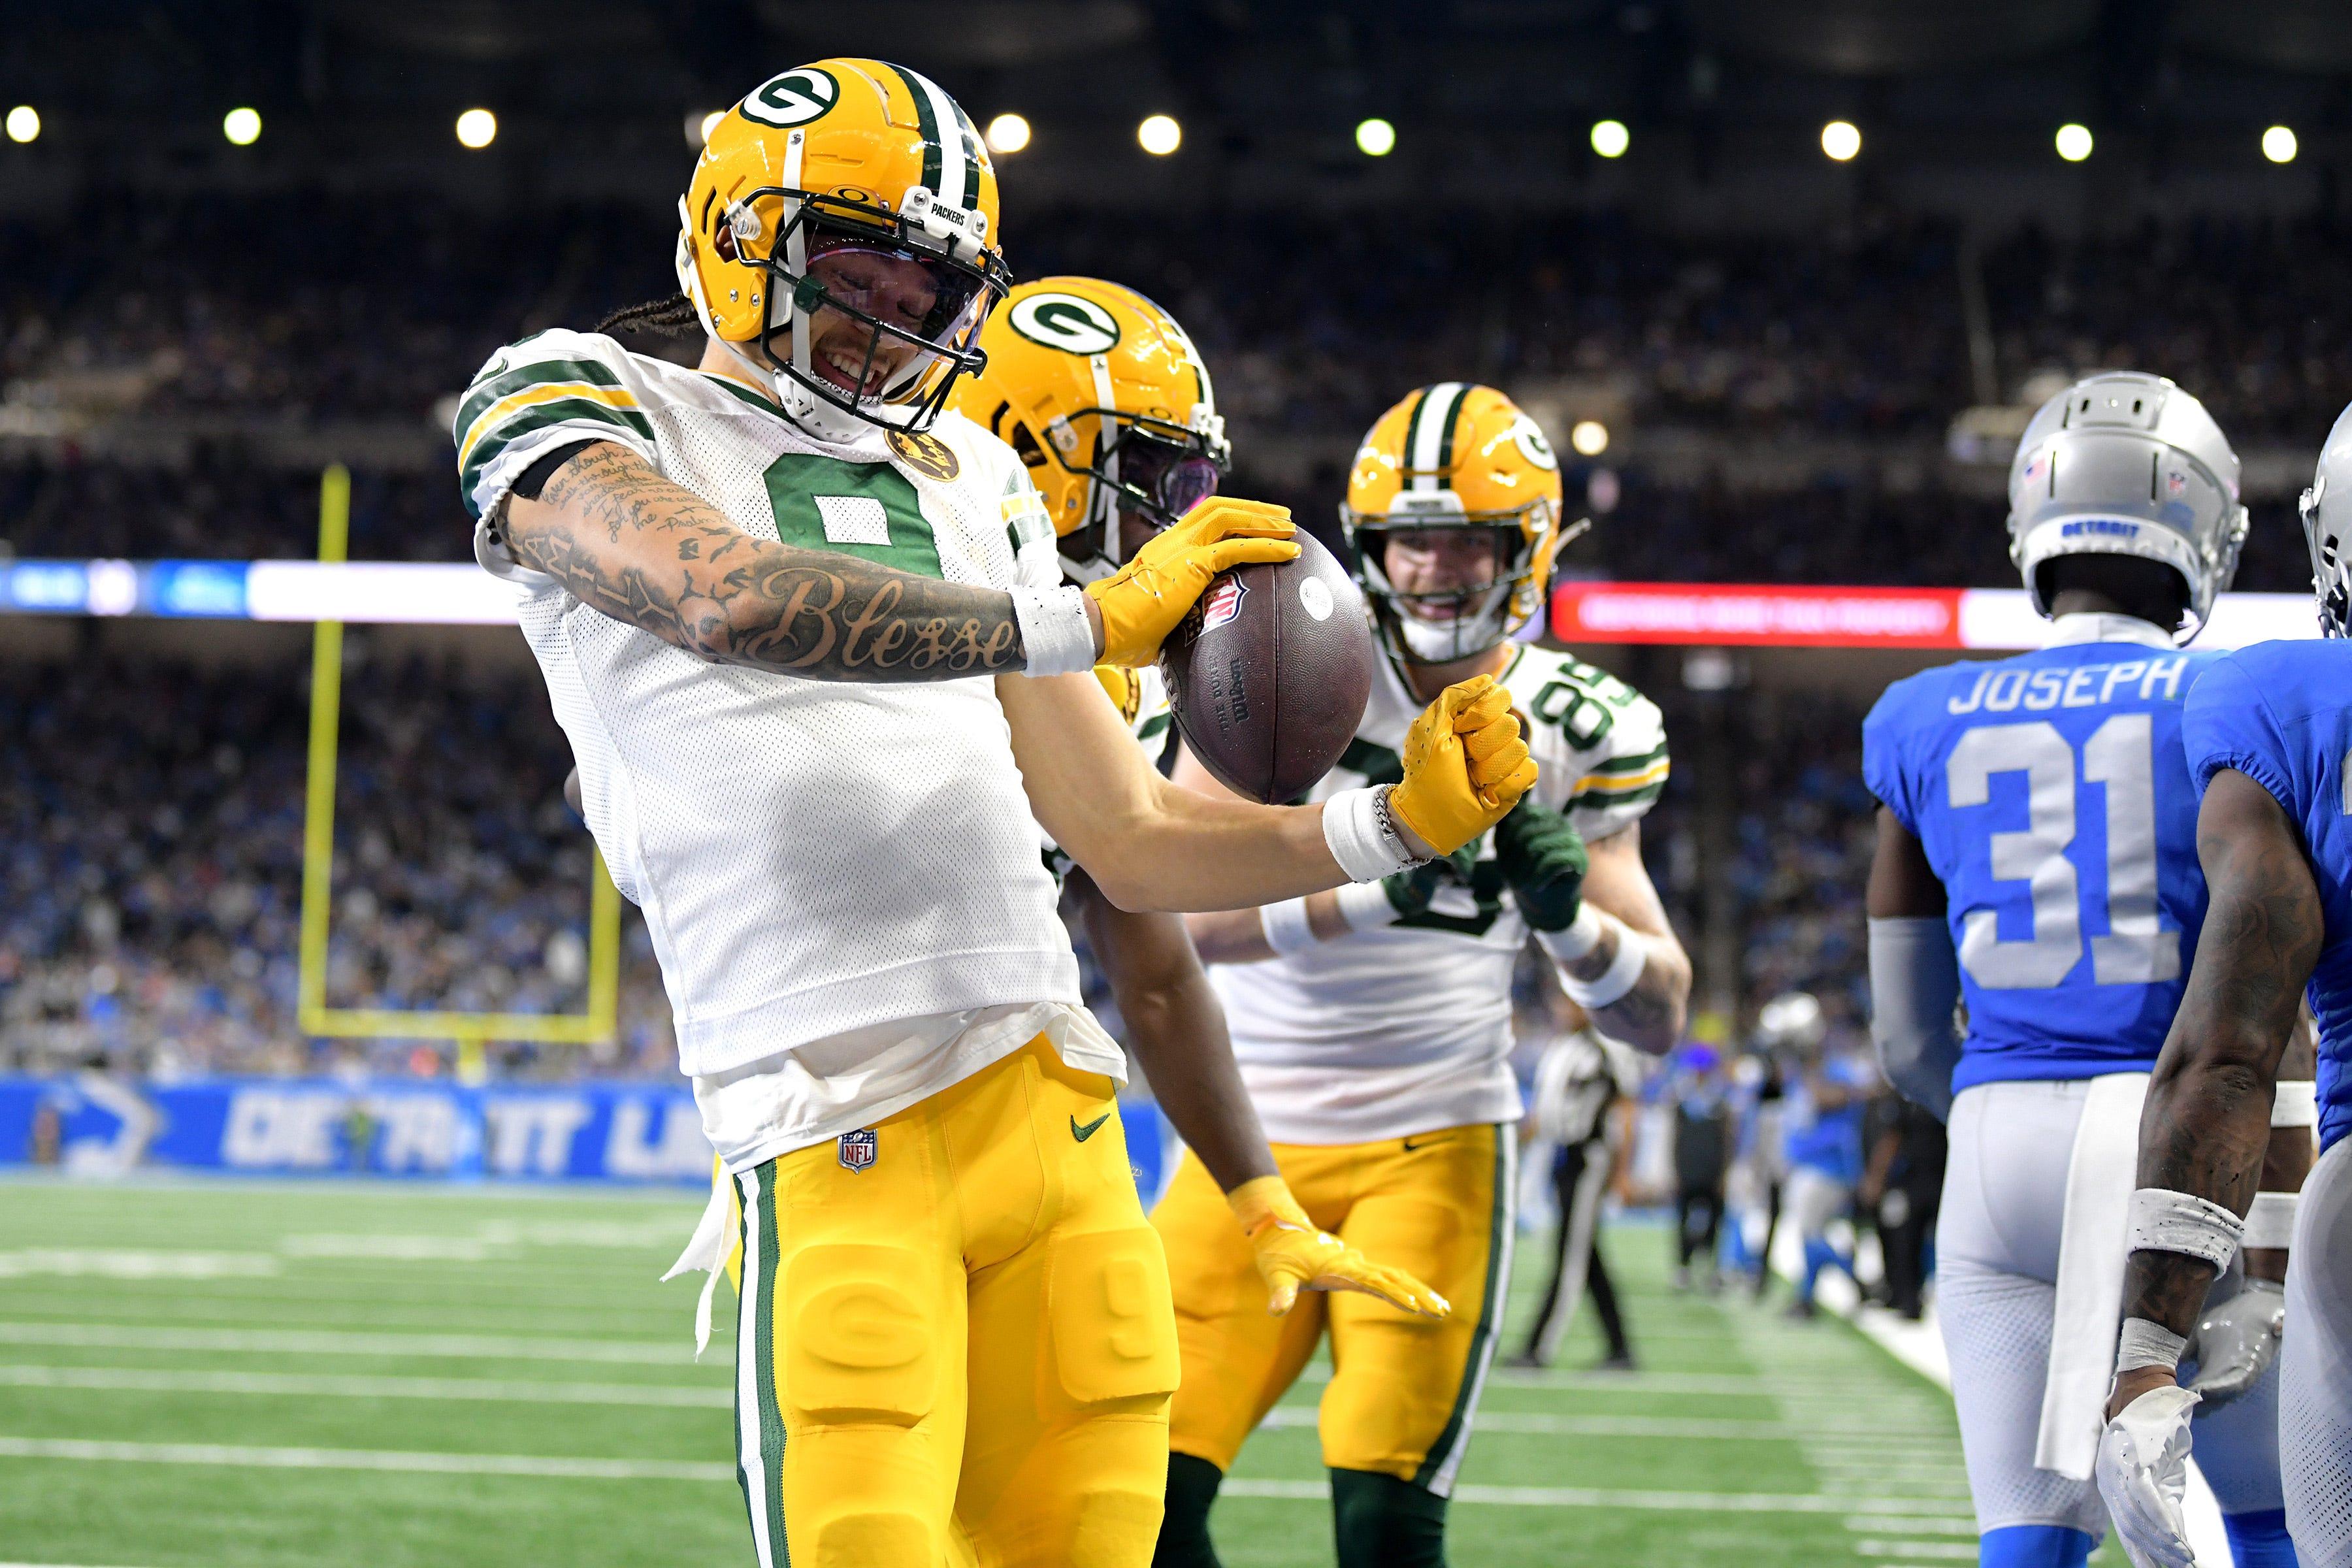 Green Bay Packers wide receiver Christian Watson celebrates after scoring a touchdown against the Detroit Lions.